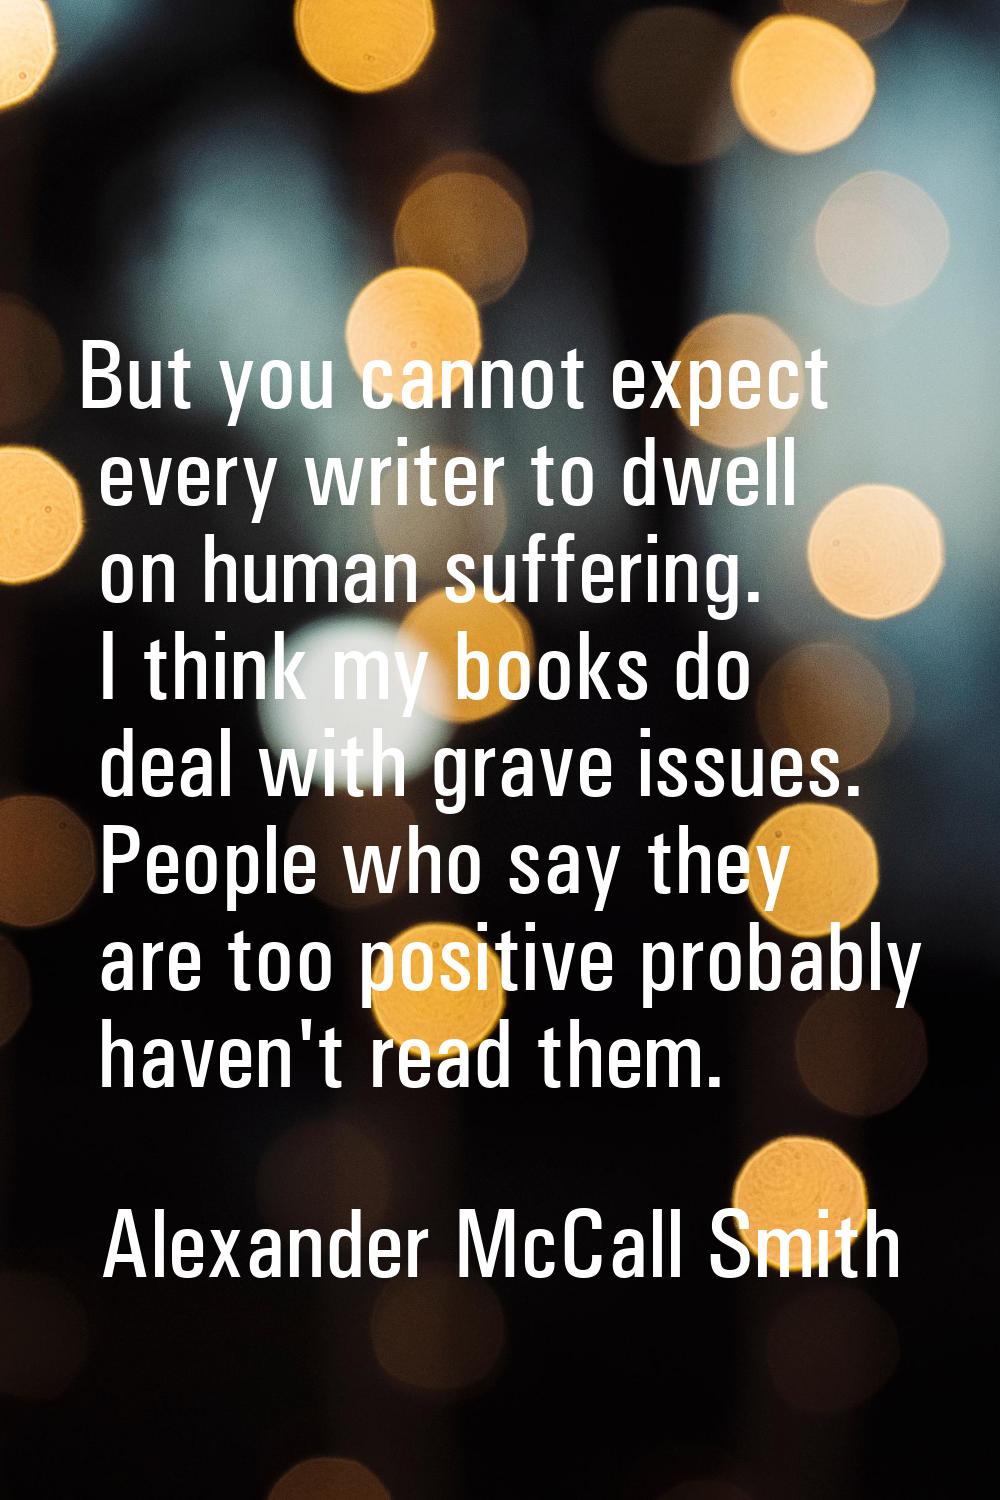 But you cannot expect every writer to dwell on human suffering. I think my books do deal with grave